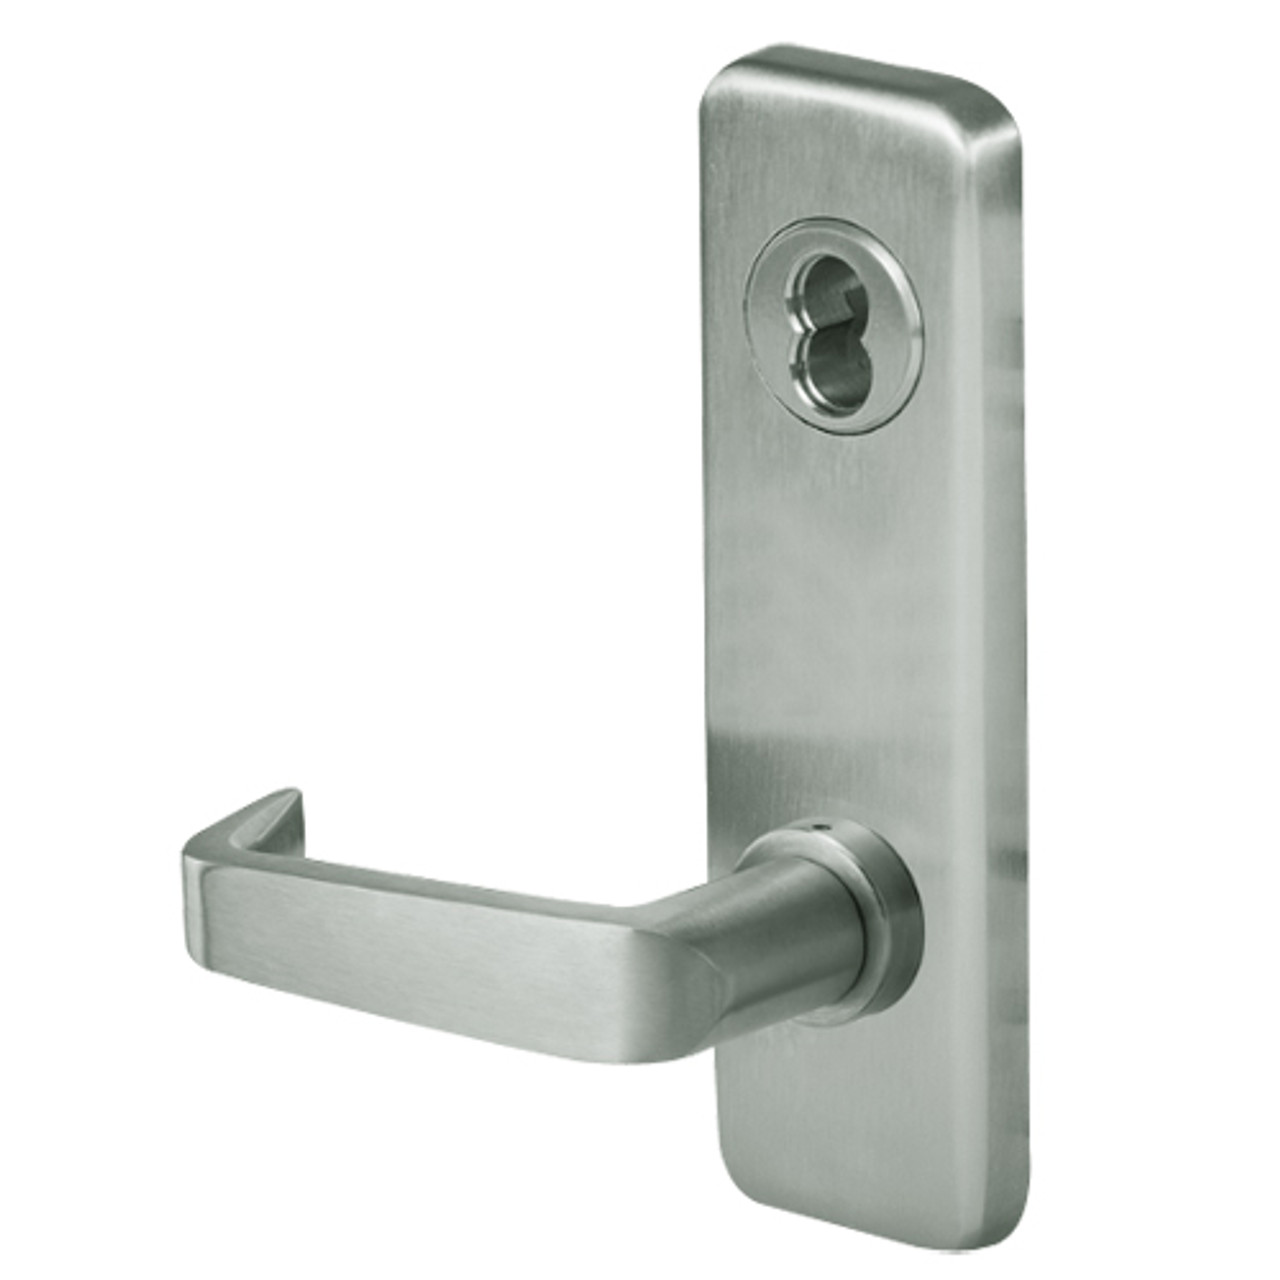 45H7B15J619 Best 40H Series Entrance with Deadbolt Heavy Duty Mortise Lever Lock with Contour with Angle Return Style in Satin Nickel